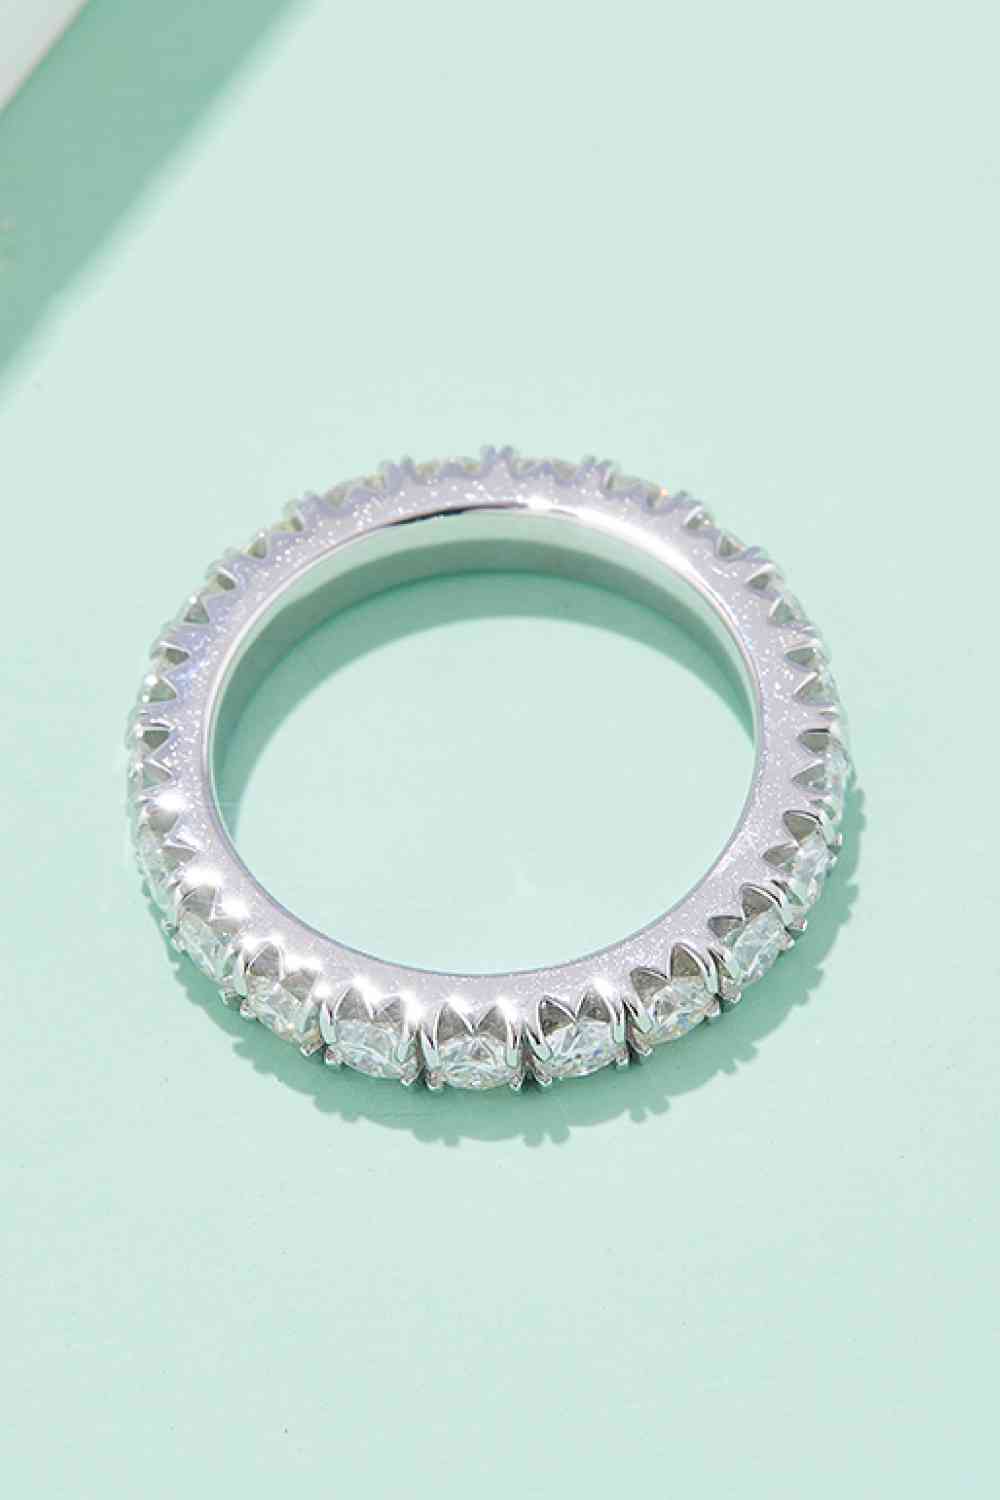 PREORDER- Adored 2.3 Carat Moissanite 925 Sterling Silver Eternity Ring